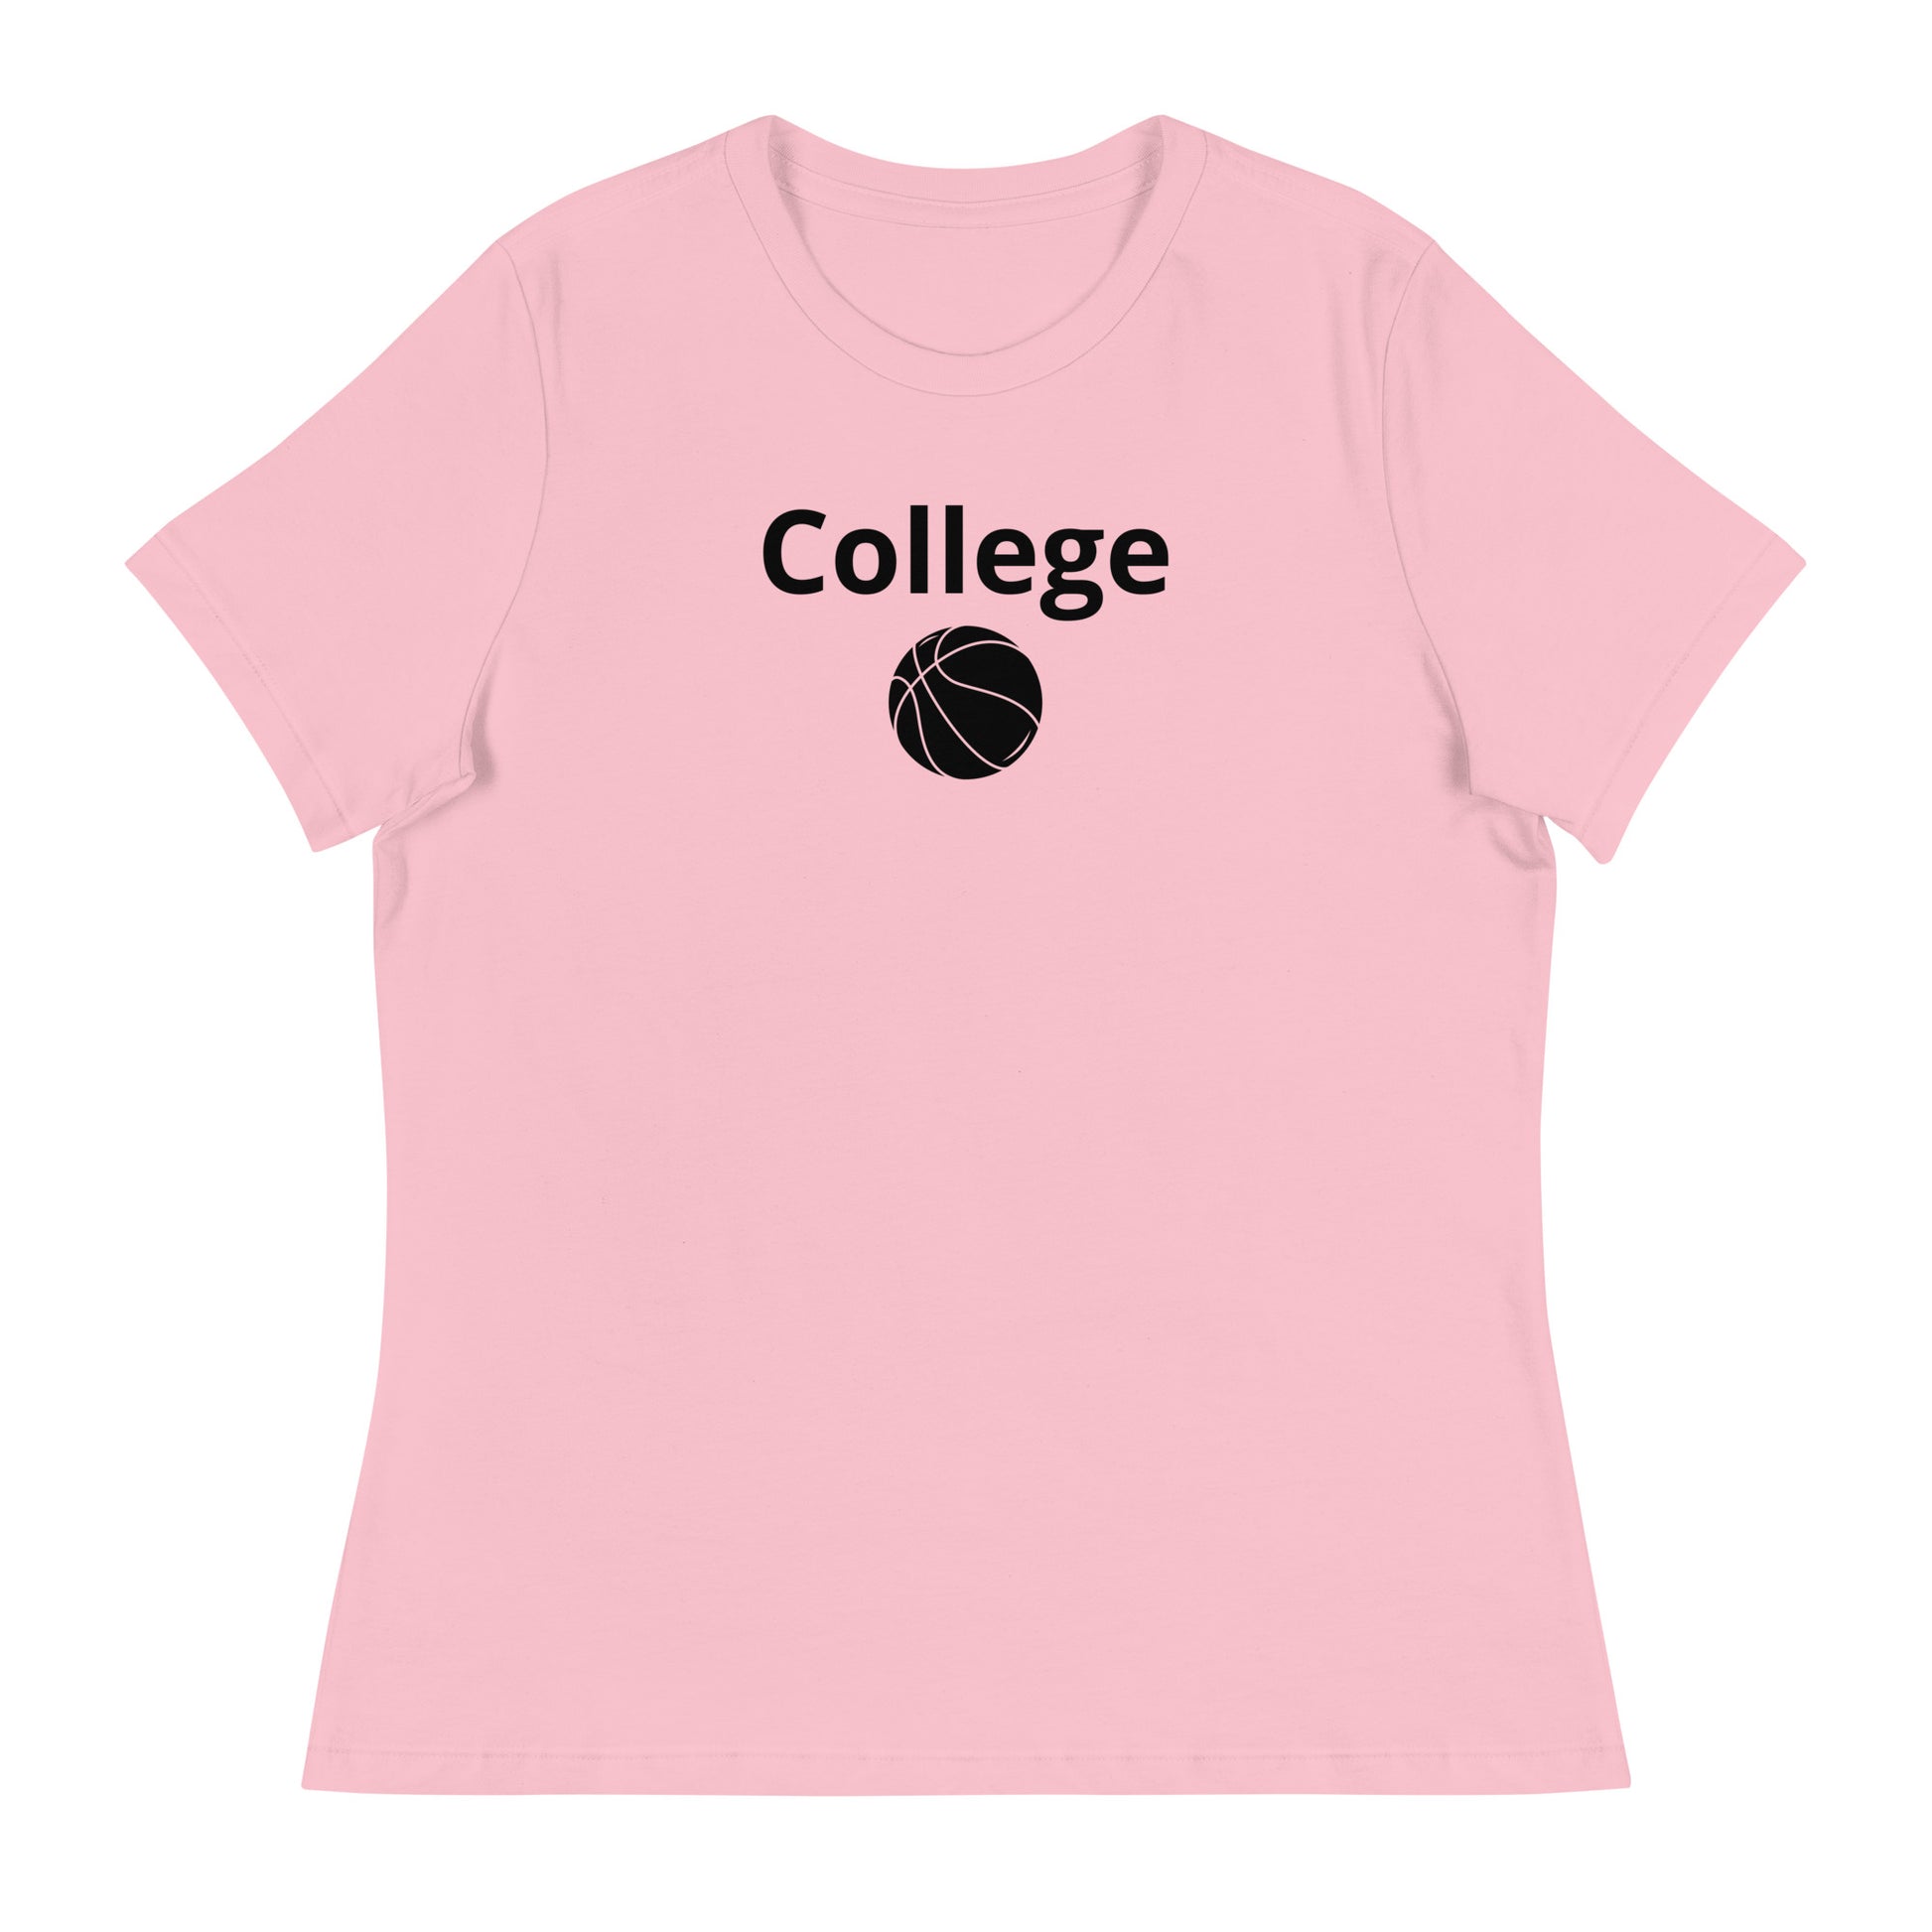 Women's college basketball graphic tee shirt in pink